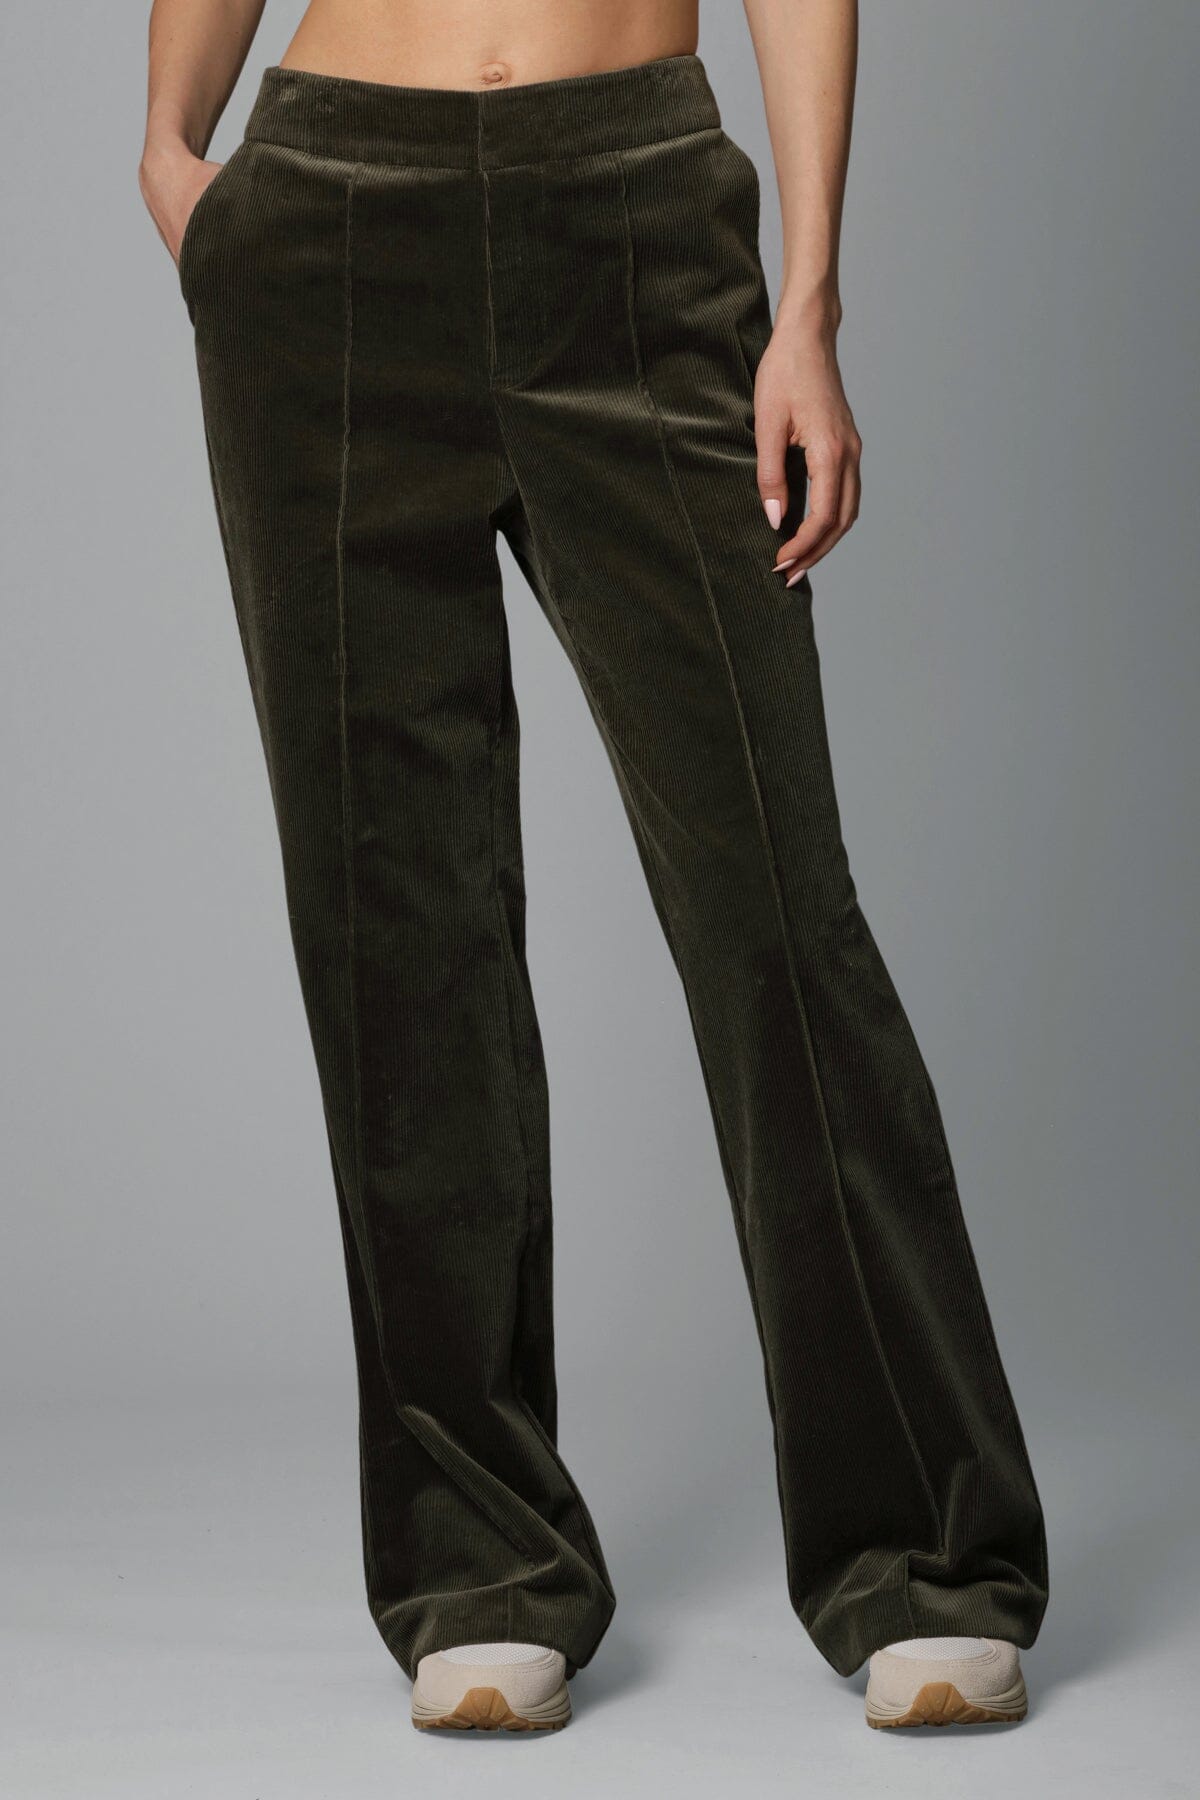 Dark moss green stretch corduroy flare trouser pant - women's figure flattering day to night trousers pants